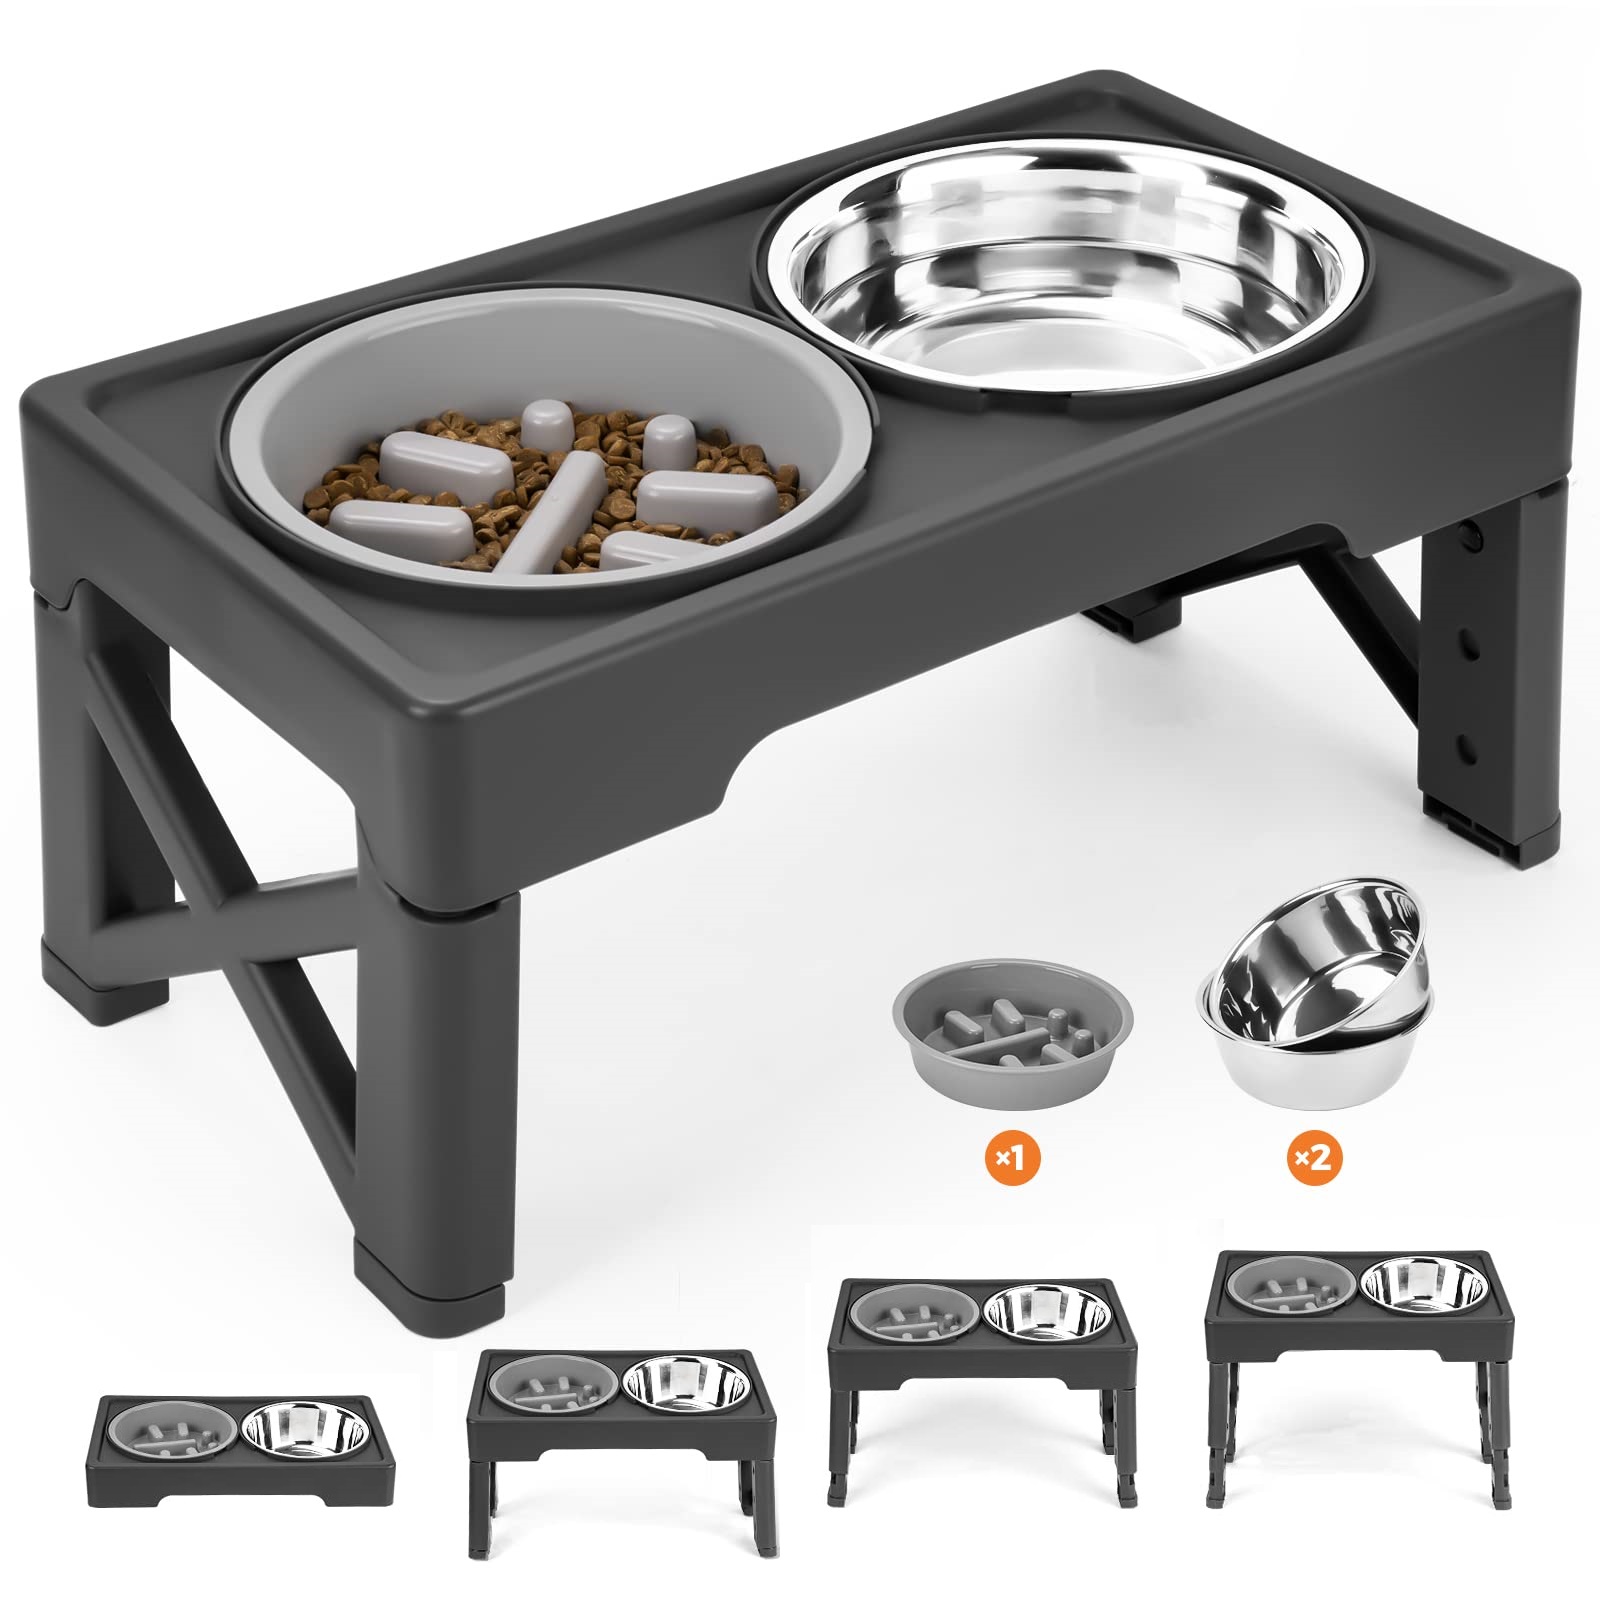 Elevated Dog Bowls 4 Adjustable Heights Raised Stand with Slow Feeder Bowl 2 Stainless Steel Food & Water Bowls